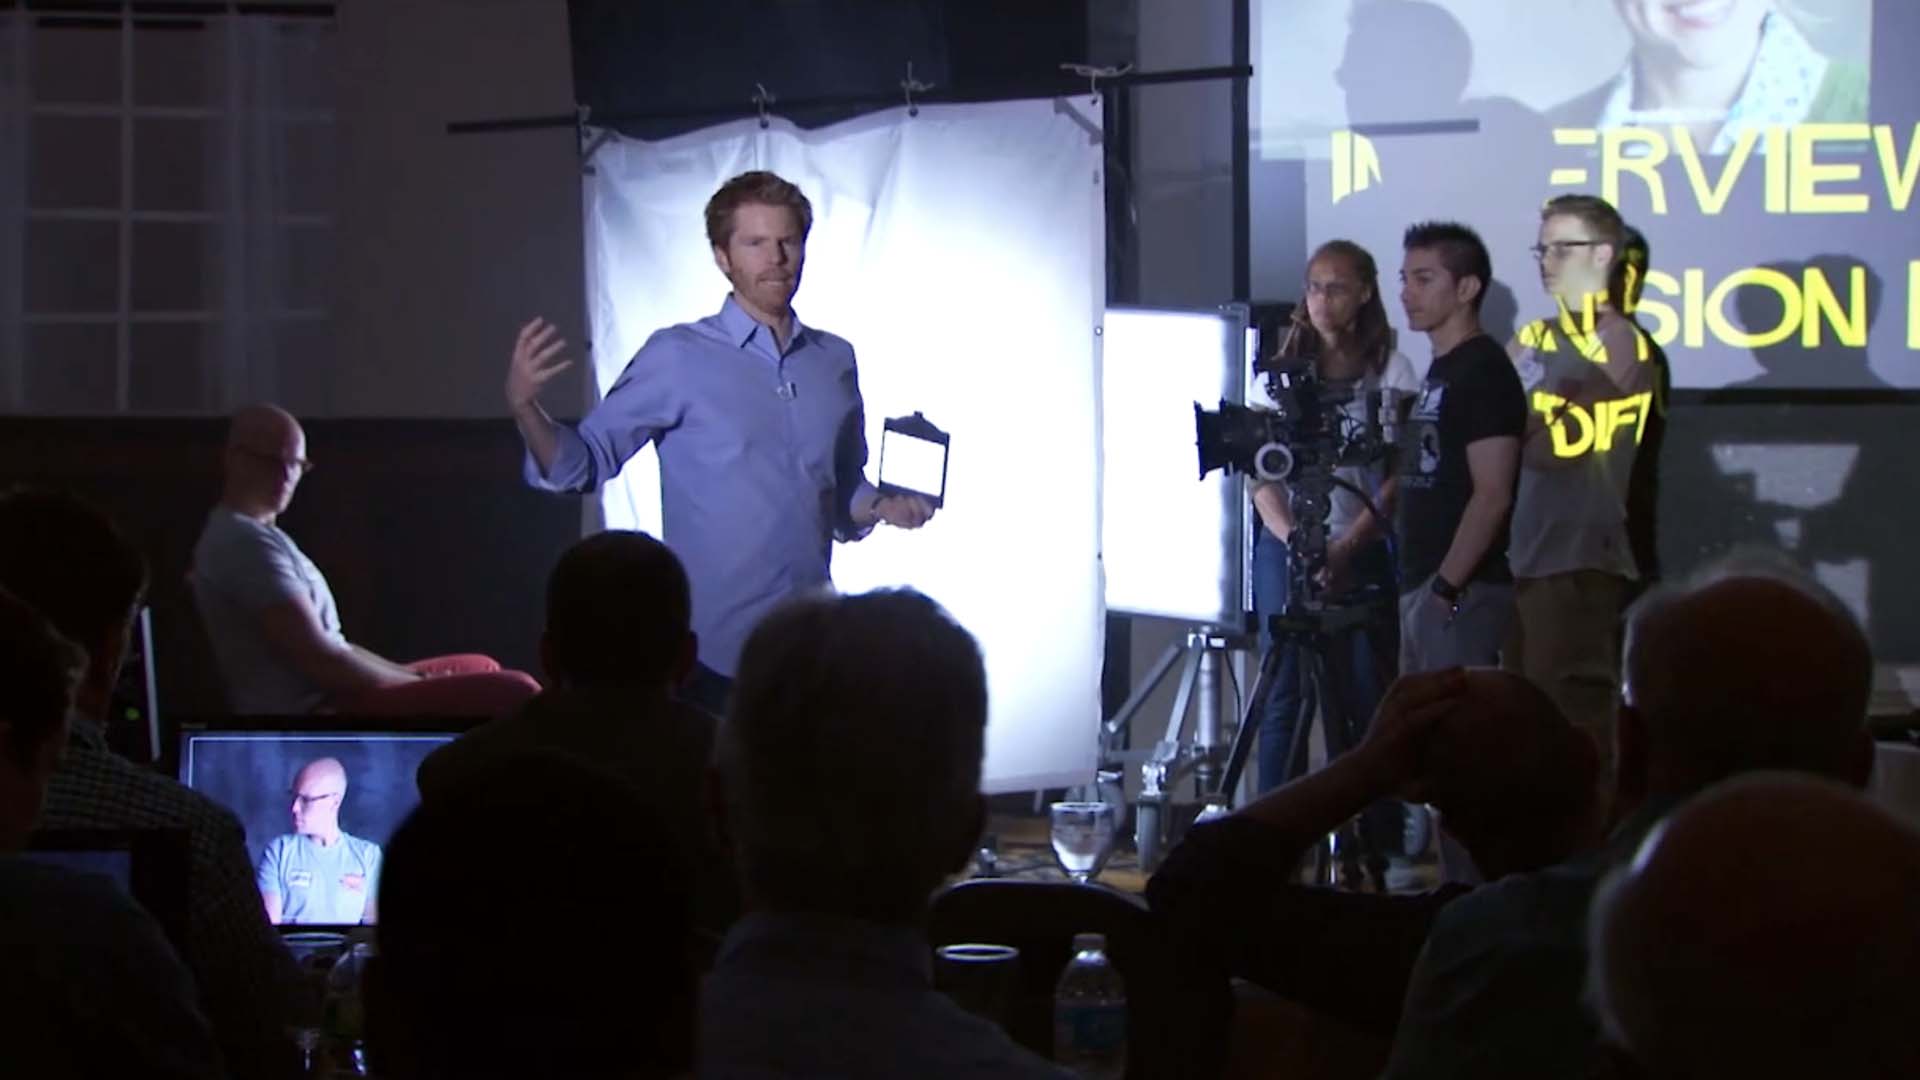 Alex Buono in the class showing the practical example of lighting the interview setup and using a lens filter